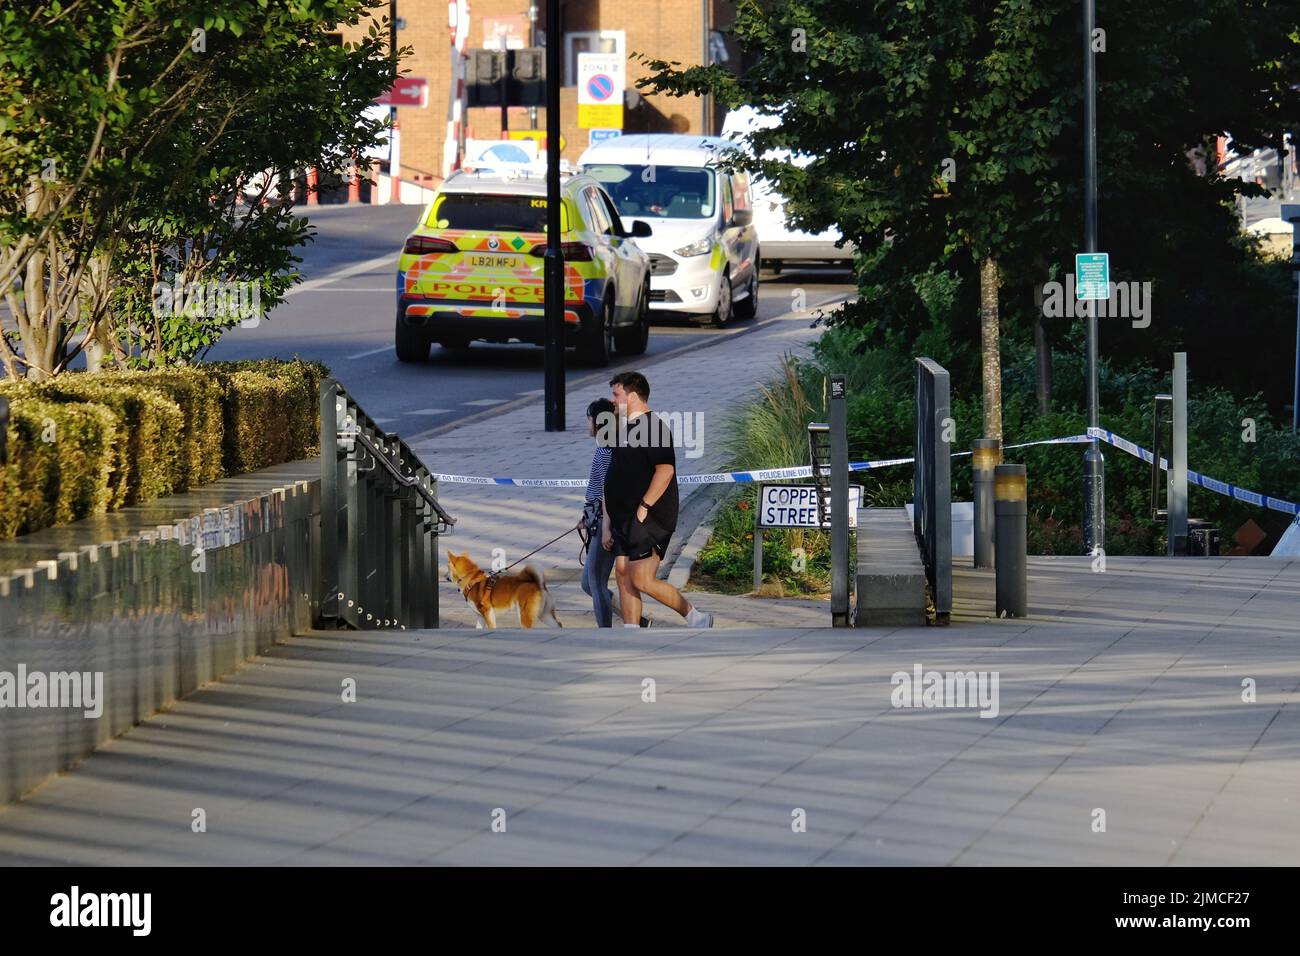 London, UK, 5th Aug, 2022. Police forensics were seen working following an armed police response after reports of a man carrying a firearm duct-taped to his hand. After an eyewitness saw a taser being activated that had no effect, the man was shot and an treated at the scene for his injuries, before being airlifted to hospital where his condition is unknown.  The incident is not believed to be terror related. Credit: Eleventh Hour Photography/Alamy Live News Stock Photo